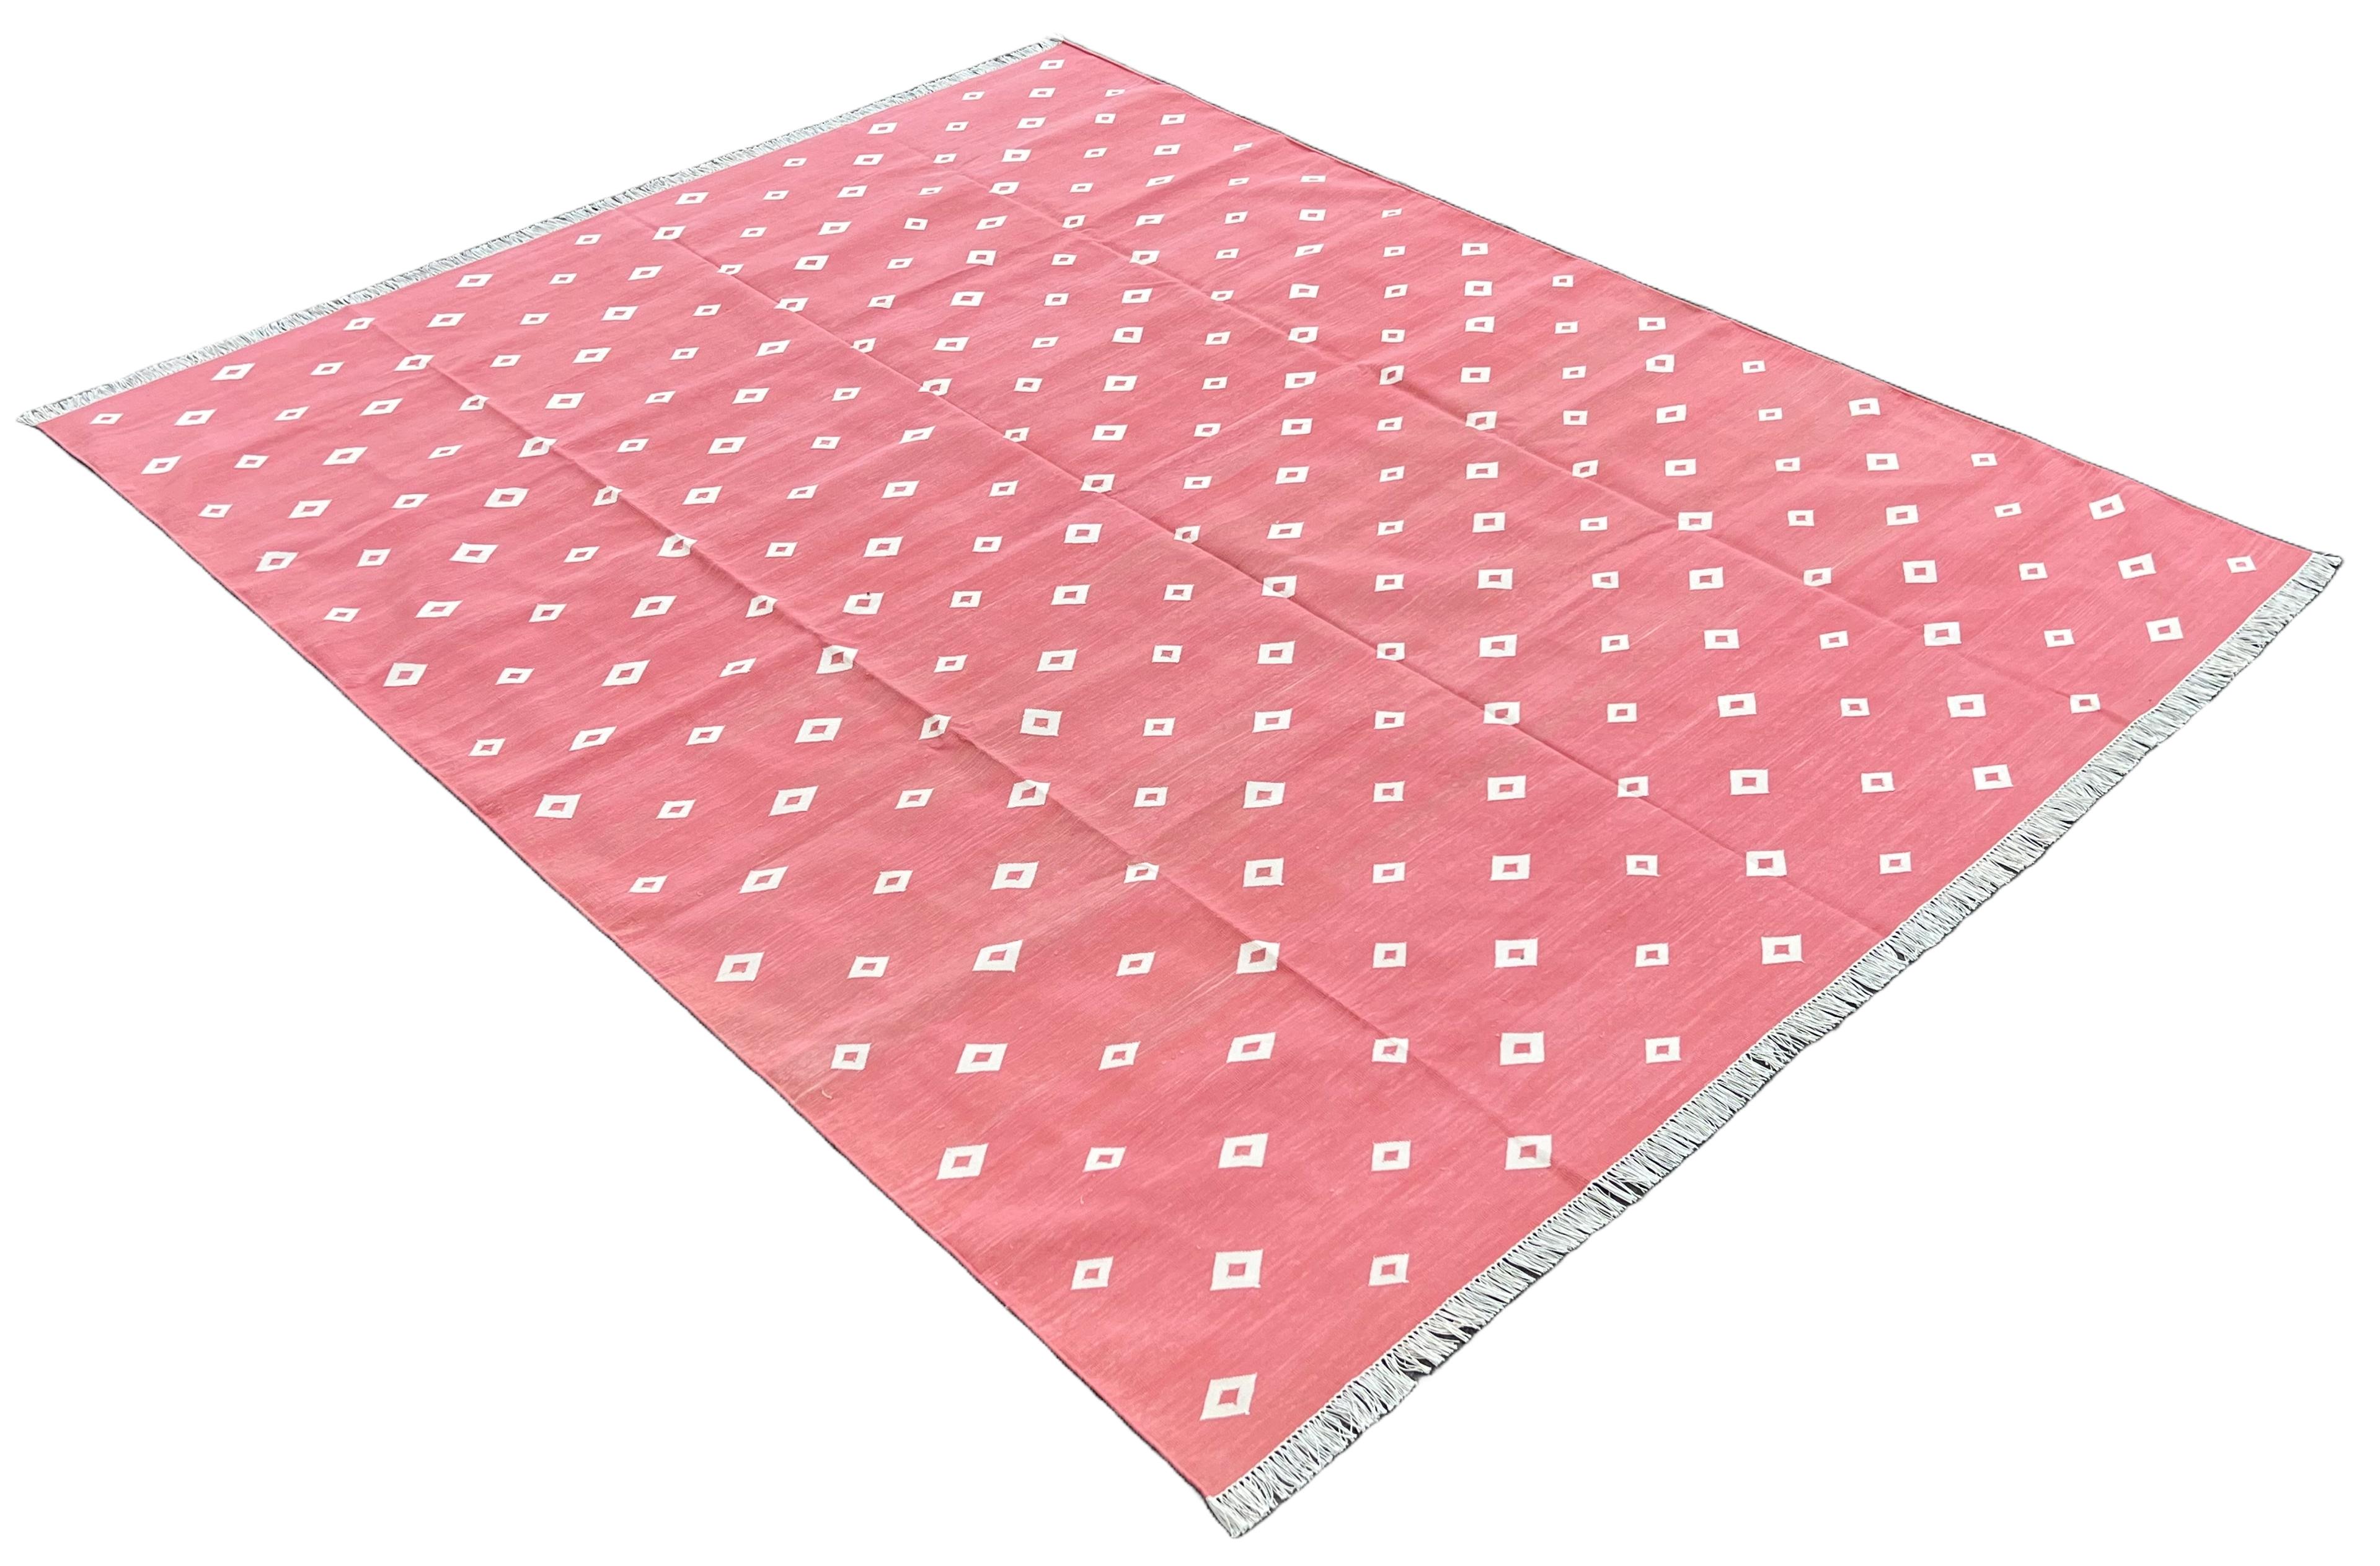 Handmade Cotton Natural Vegetable Dyed Rug, Pink And White Diamond Indian Dhurrie- 8'x10'
These special flat-weave dhurries are hand-woven with 15 ply 100% cotton yarn. Due to the special manufacturing techniques used to create our rugs, the size